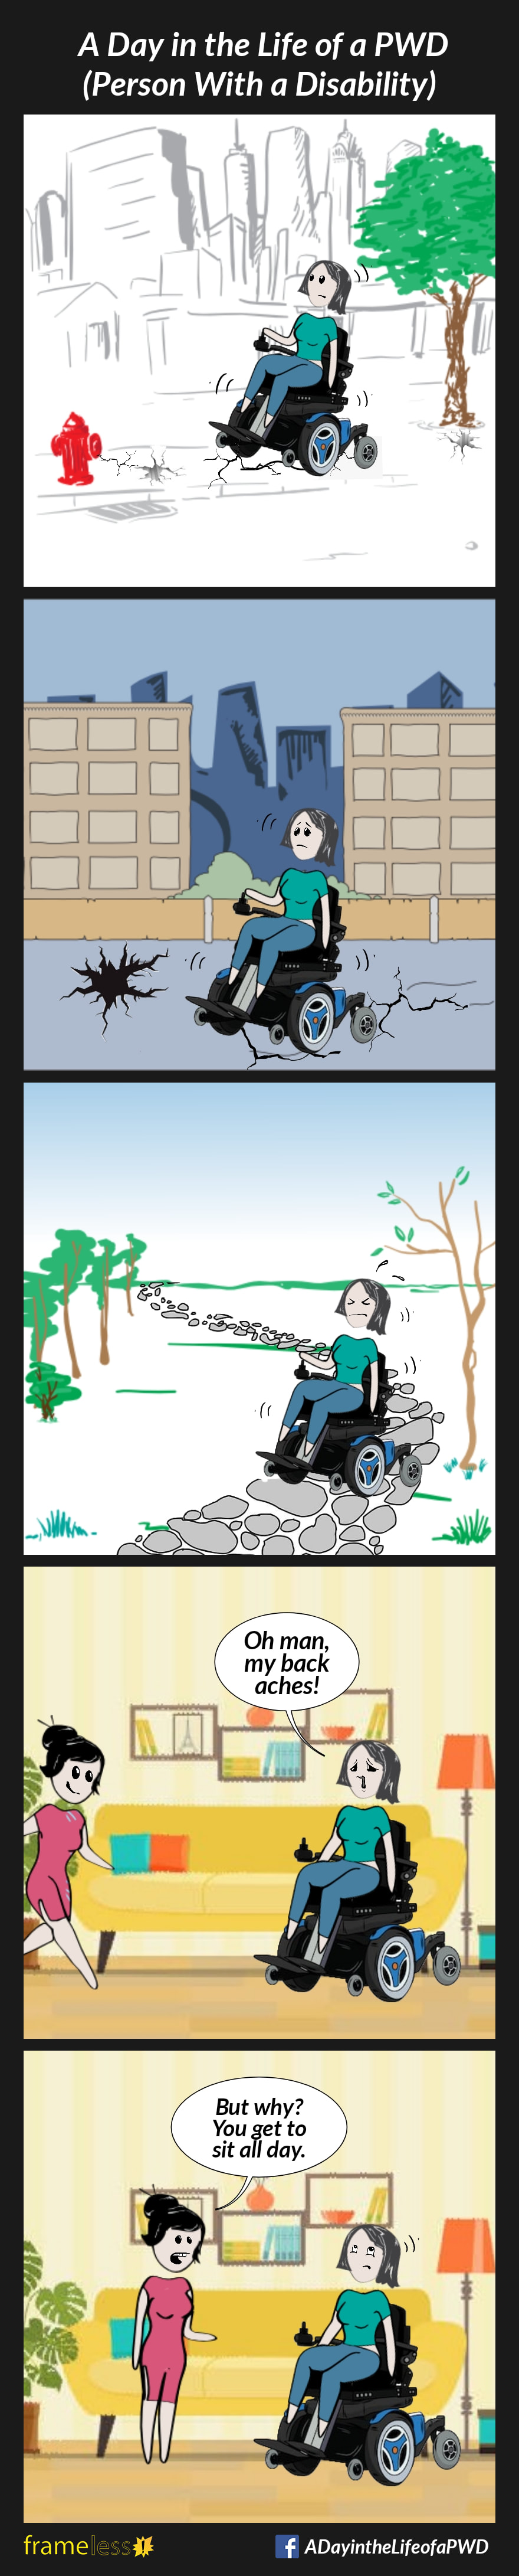 COMIC STRIP 
A Day in the Life of a PWD (Person With a Disability) 

Frame 1:
A woman in a power wheelchair is bumping along a badly maintained sidewalk. 

Frame 2:
The woman is bumping along a cracked and broken street.

Frame 3:
The woman is bumping along a cobblestone path through a park.

Frame 4:
The woman arrives at a friend's house.
WOMAN: Oh man, my back aches!

Frame 5:
FRIEND: But why? You get to sit all day.
The woman rolls her eyes.